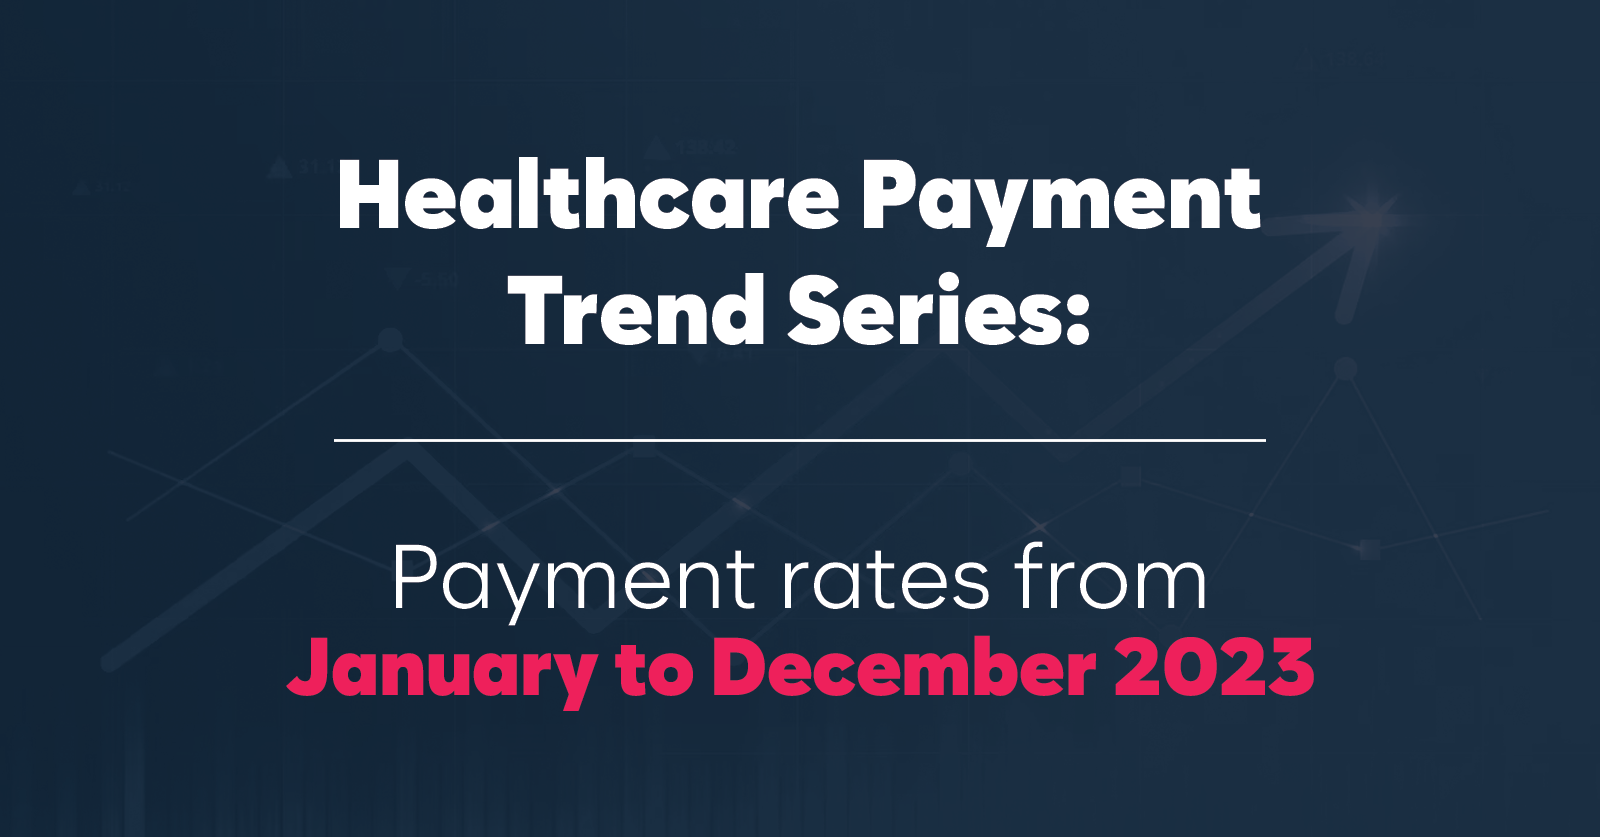 Payment Rates from January to December 2023